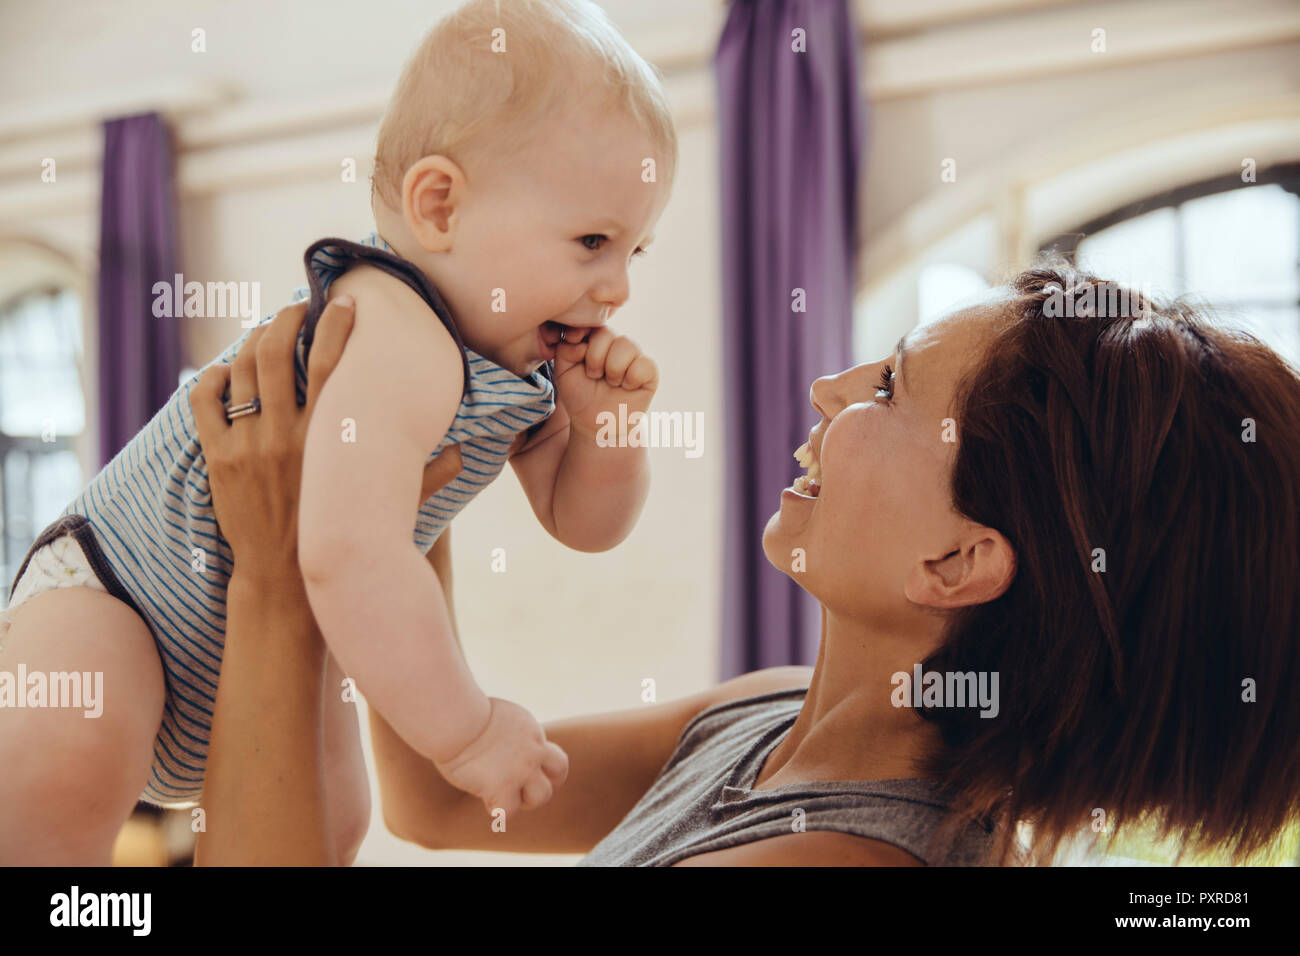 Sporty woman lifting up happy baby in training room Stock Photo